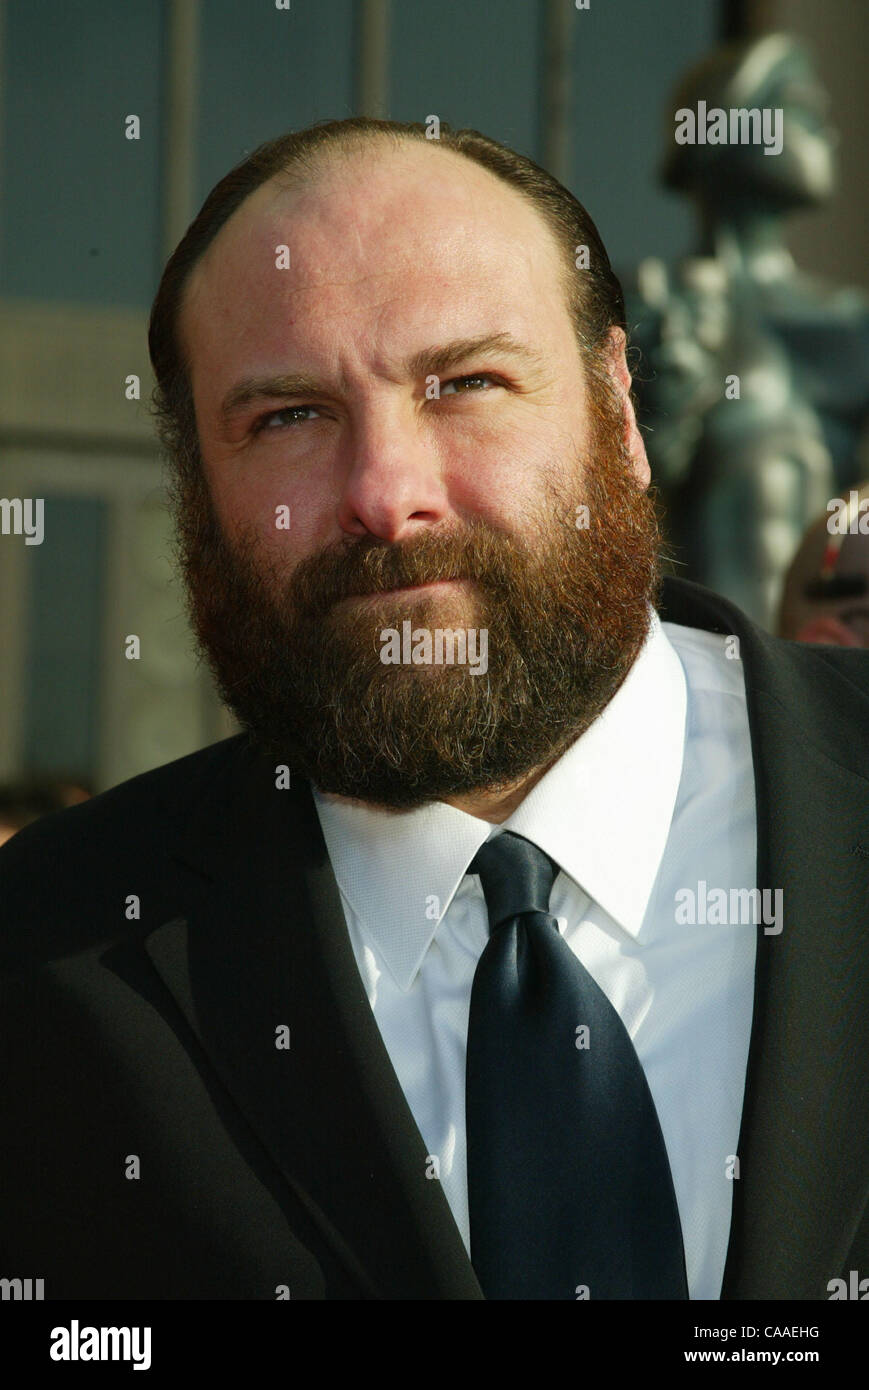 Mar 09, 2003; Los Angeles, CA, USA; Actor JAMES GANDOLFINI arrives @ the 9th Annual Screen Actors Guild Awards held at the Shrine Exposition Center in Los Angeles. Stock Photo